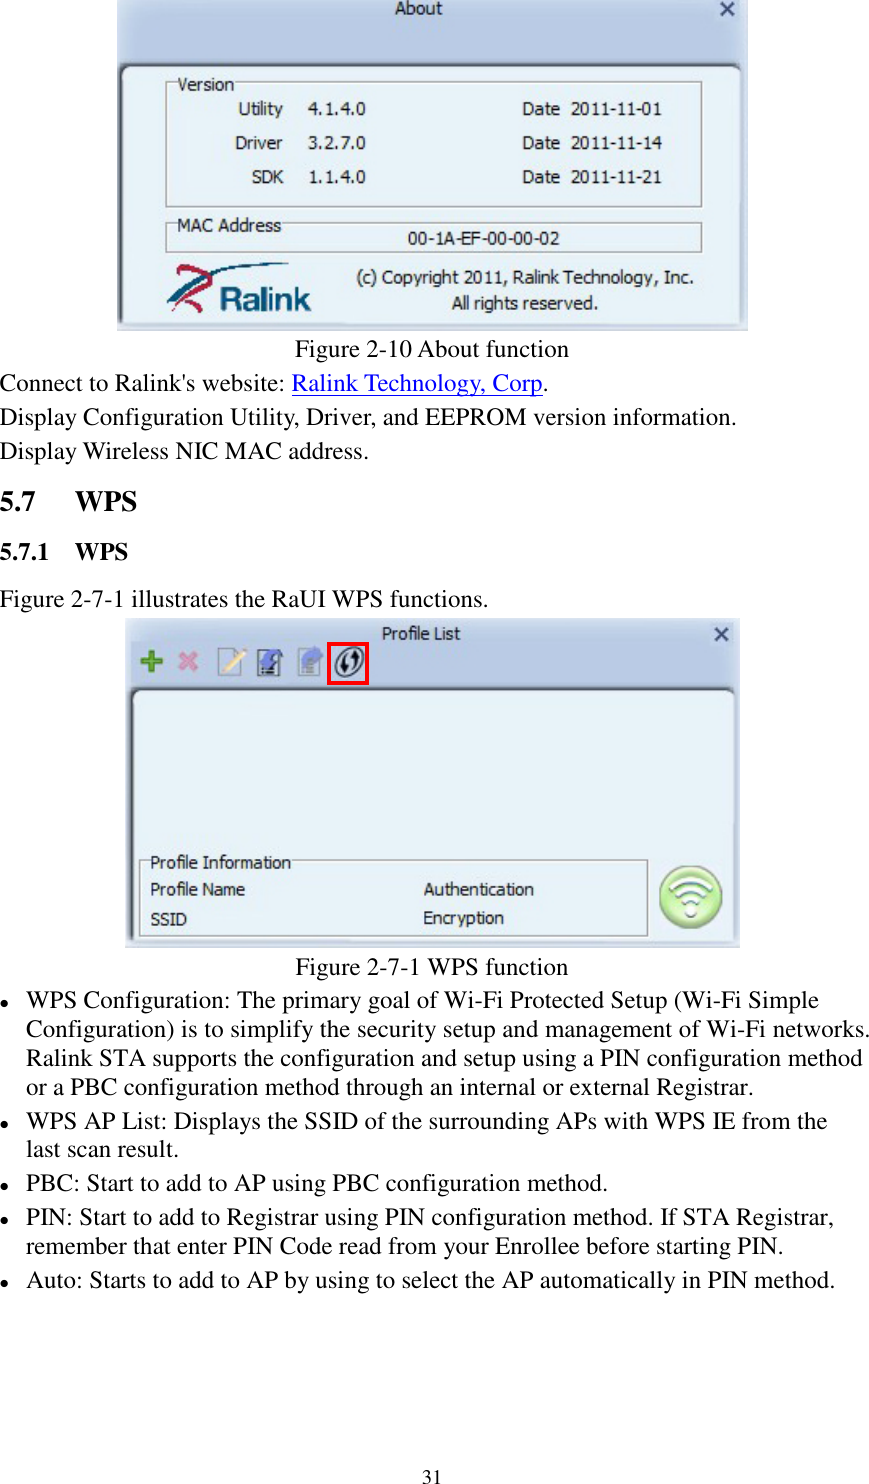 31Figure 2-10 About functionConnect to Ralink&apos;s website: Ralink Technology, Corp.Display Configuration Utility, Driver, and EEPROM version information.Display Wireless NIC MAC address.5.7 WPS5.7.1 WPSFigure 2-7-1 illustrates the RaUI WPS functions.Figure 2-7-1 WPS functionWPS Configuration: The primary goal of Wi-Fi Protected Setup (Wi-Fi SimpleConfiguration) is to simplify the security setup and management of Wi-Fi networks.Ralink STA supports the configuration and setup using a PIN configuration methodor a PBC configuration method through an internal or external Registrar.WPS AP List: Displays the SSID of the surrounding APs with WPS IE from thelast scan result.PBC: Start to add to AP using PBC configuration method.PIN: Start to add to Registrar using PIN configuration method. If STA Registrar,remember that enter PIN Code read from your Enrollee before starting PIN.Auto: Starts to add to AP by using to select the AP automatically in PIN method.